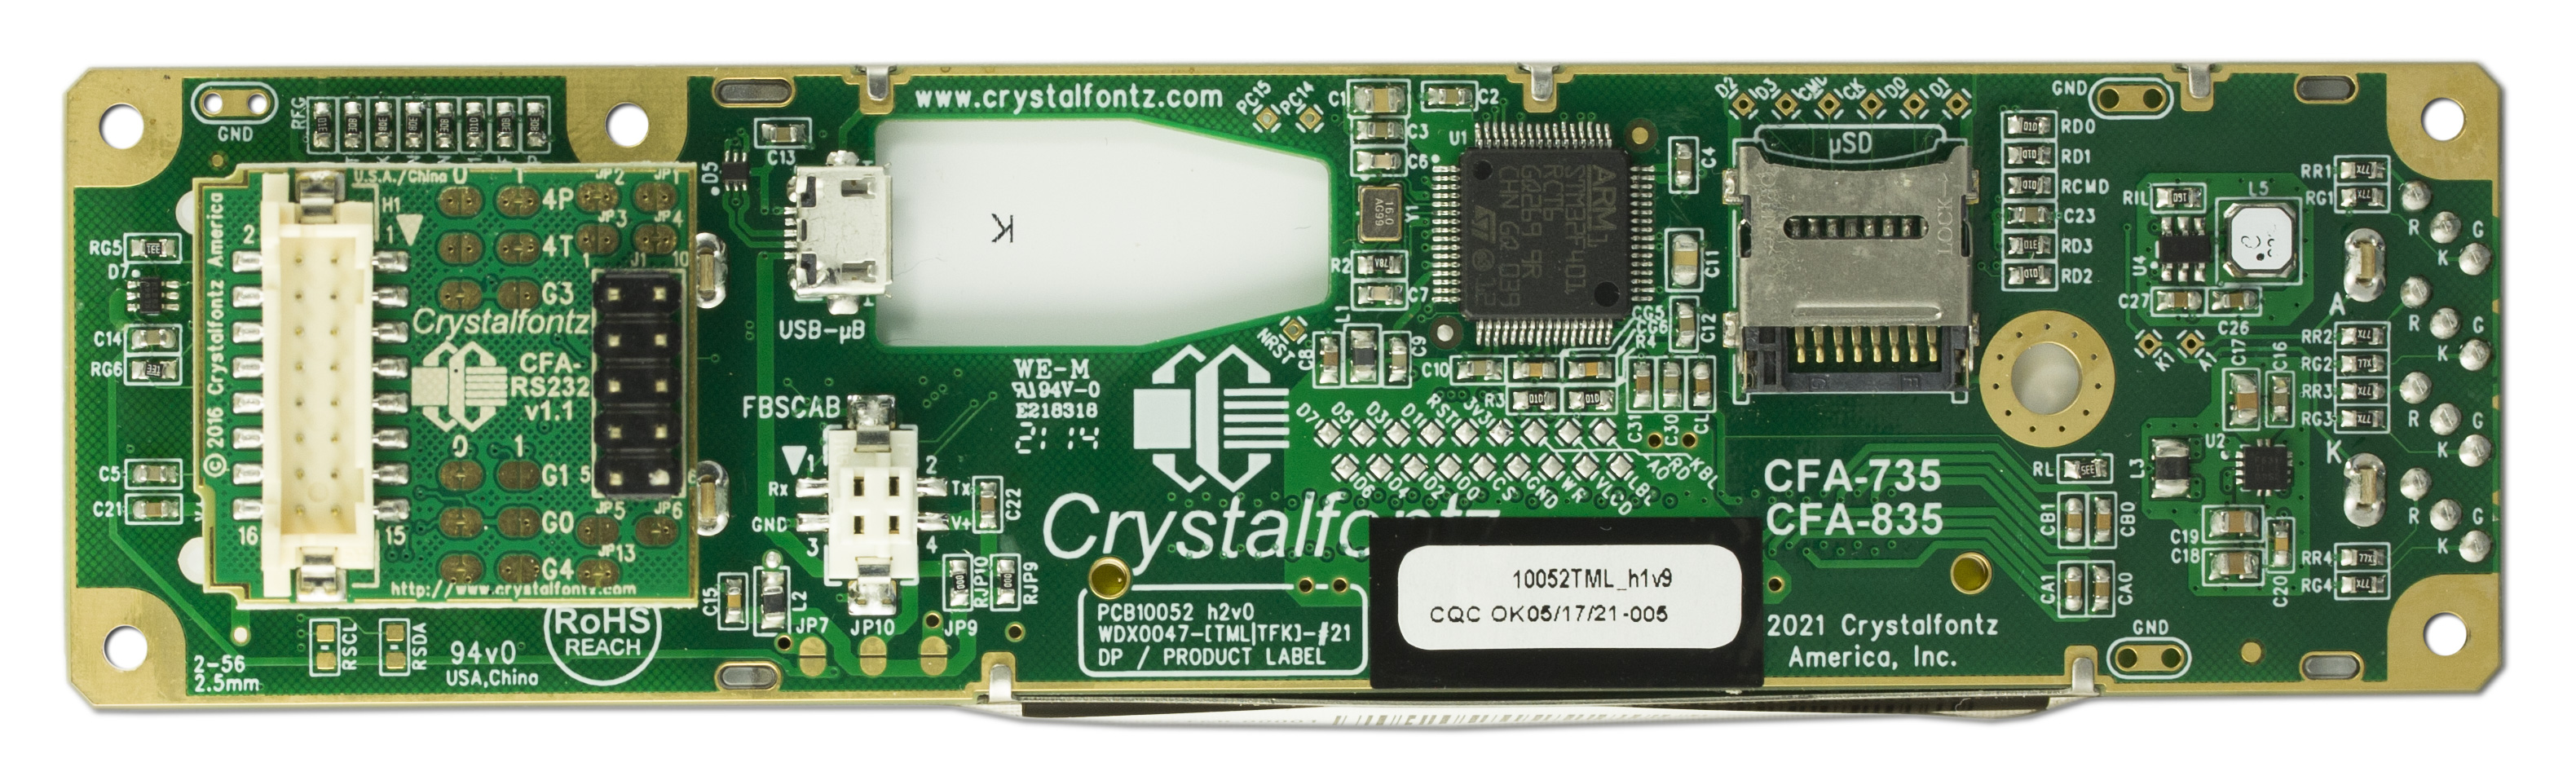 20x4 Character RS232 Display Module from Crystalfontz